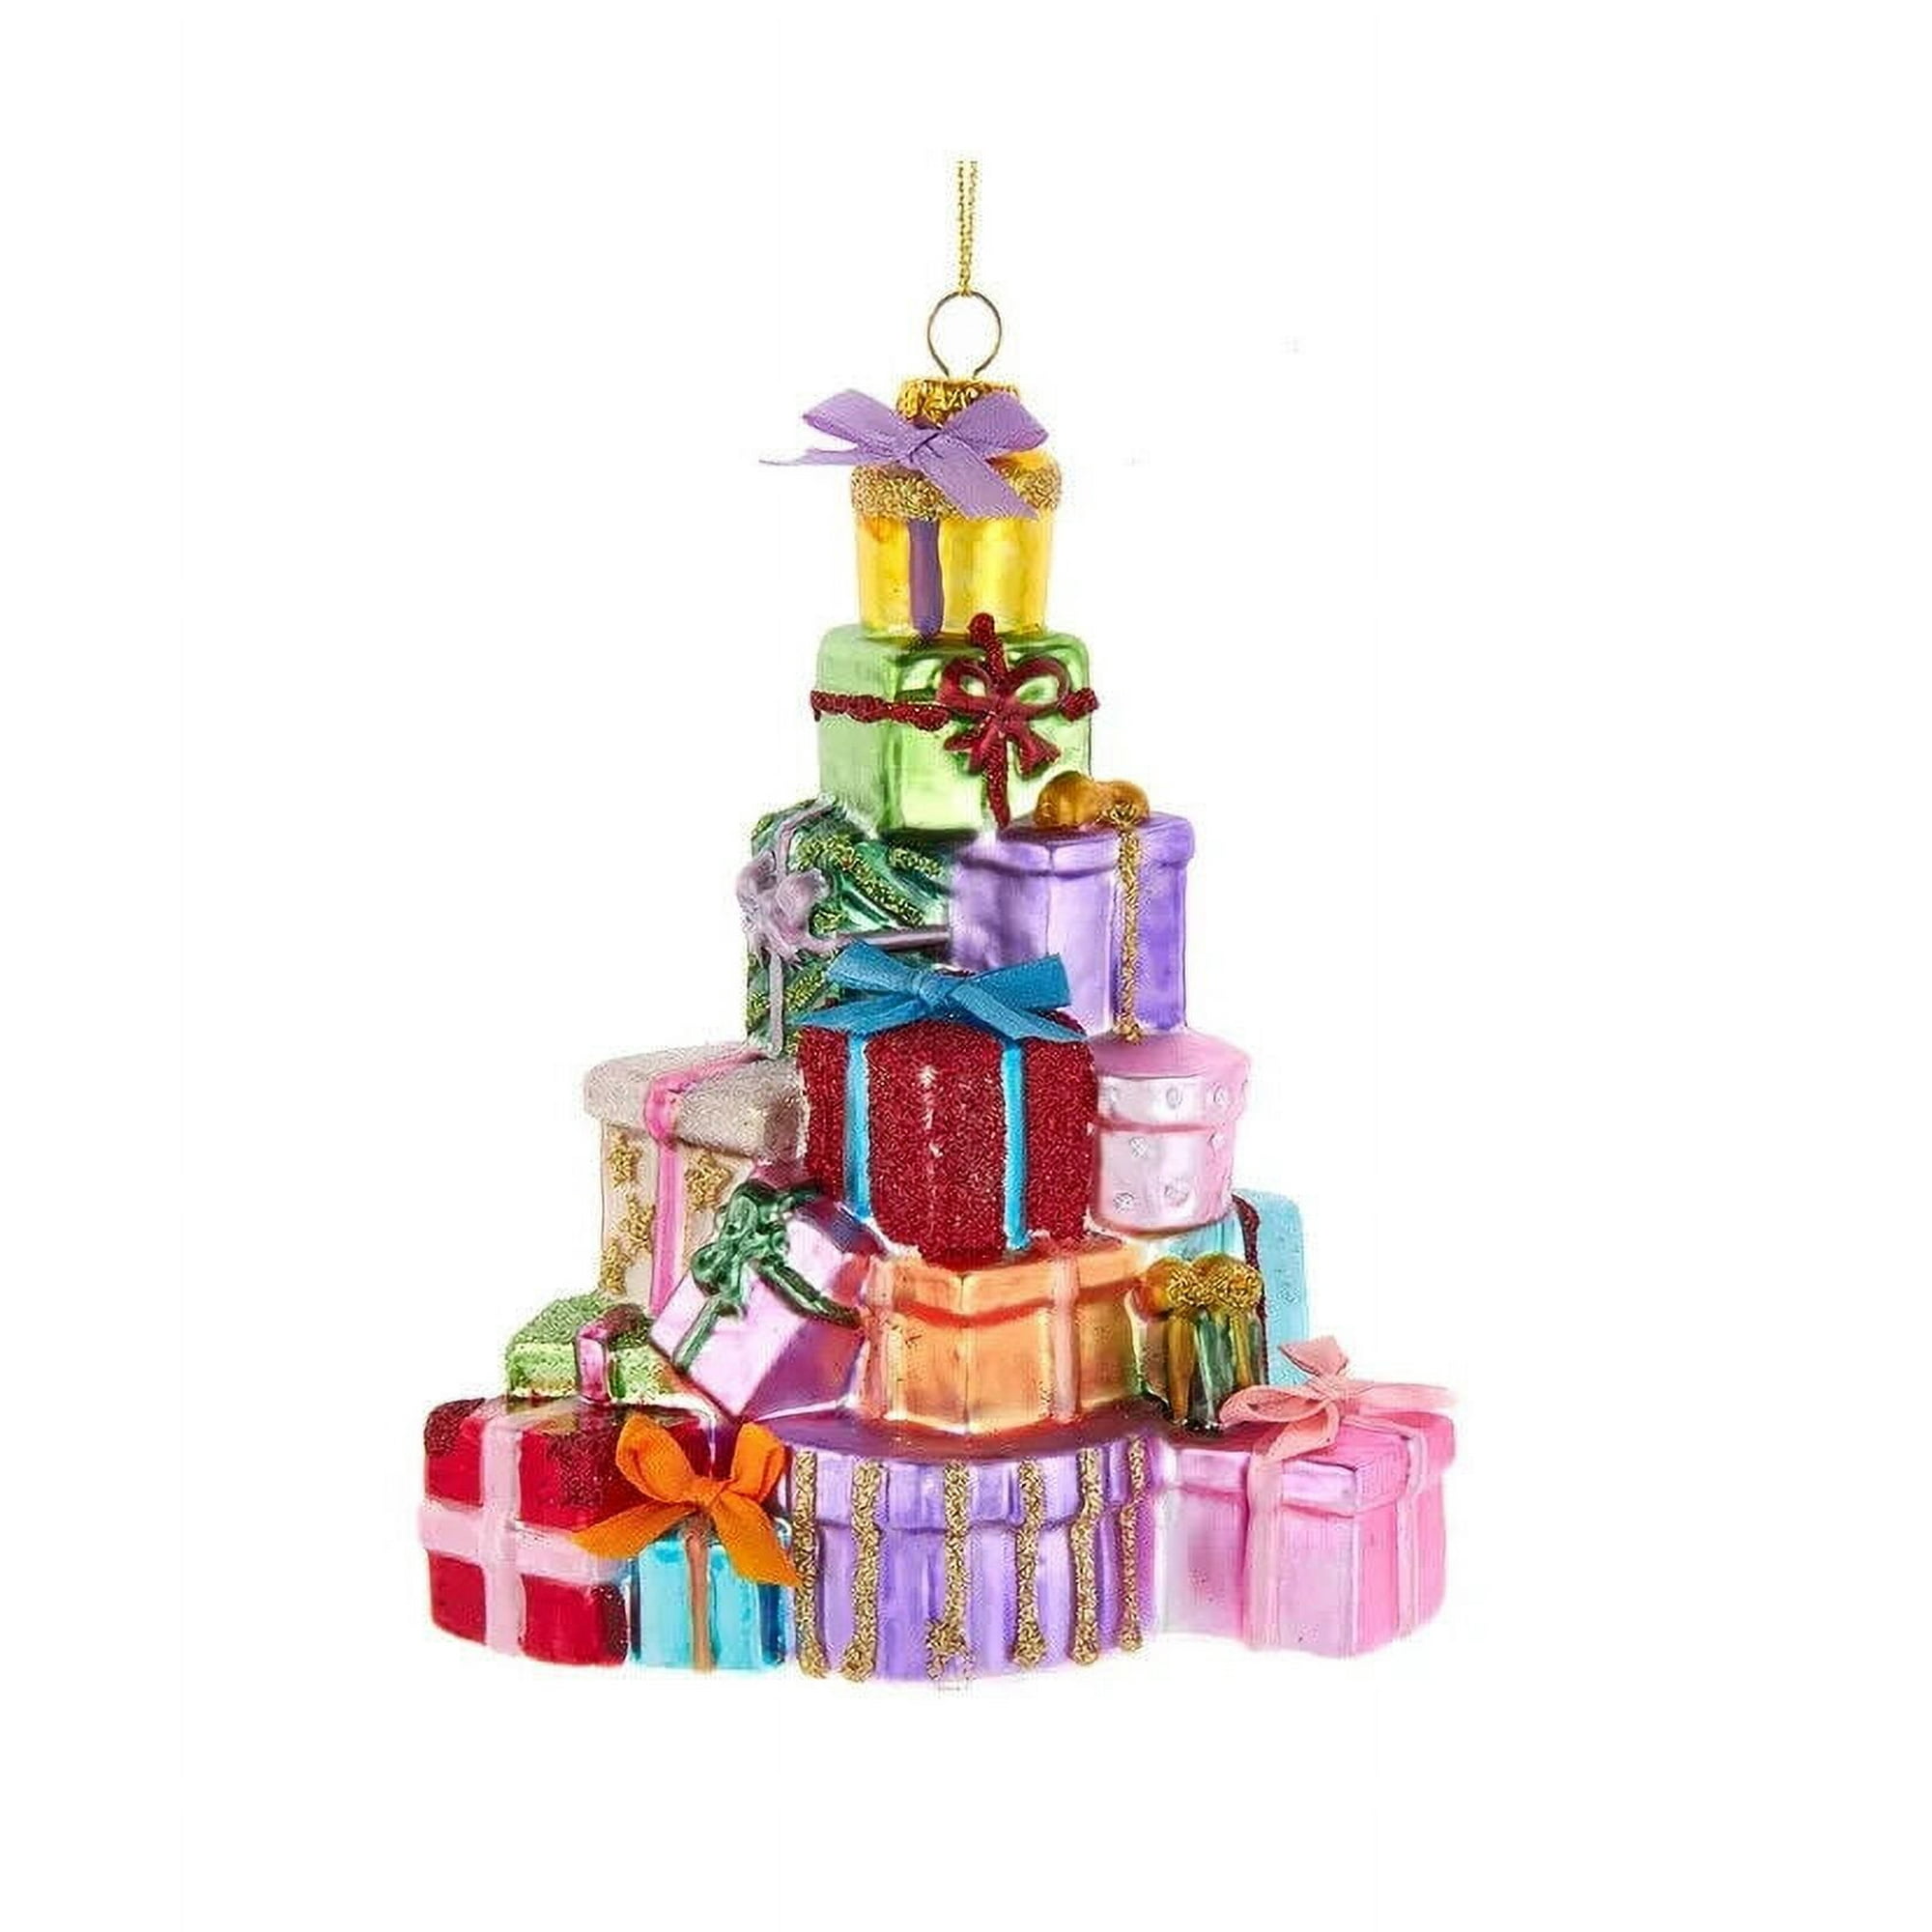 STACK OF GIFT BOXES Large Glass Christmas Ornament